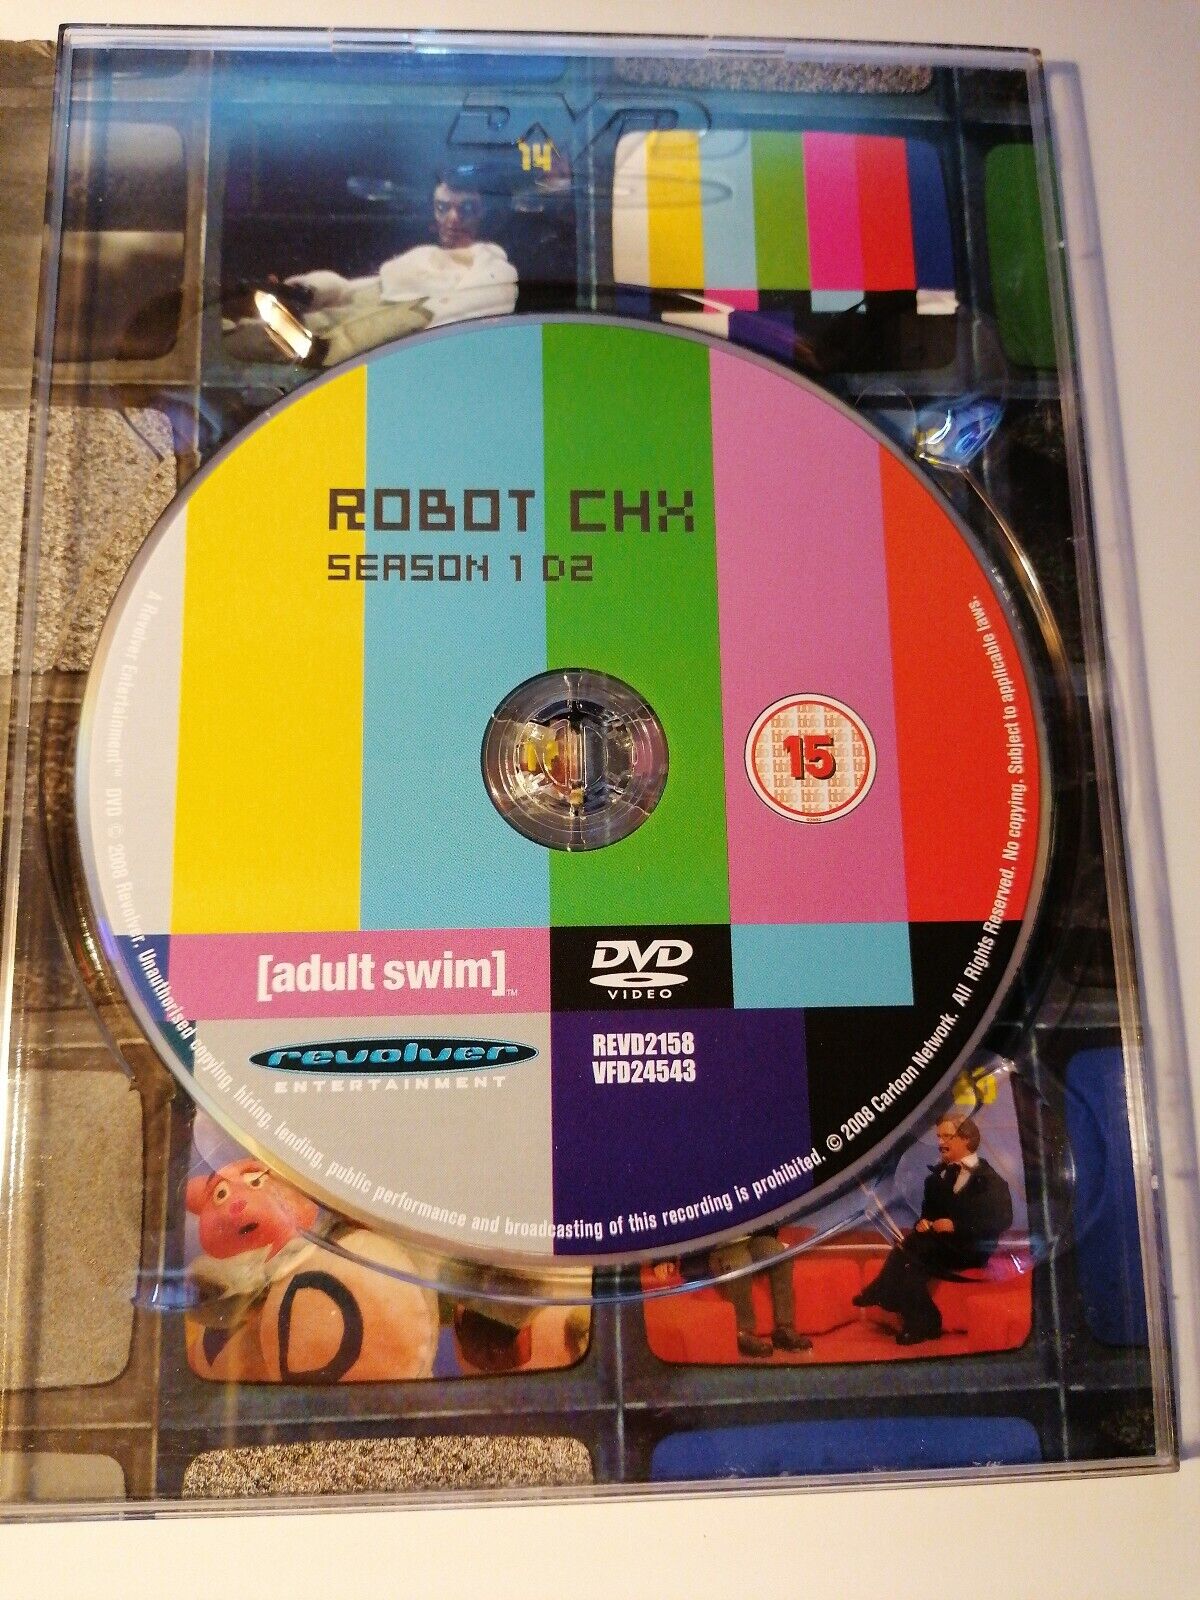 Robot chicken season 1 (adult swim) DVD with special features